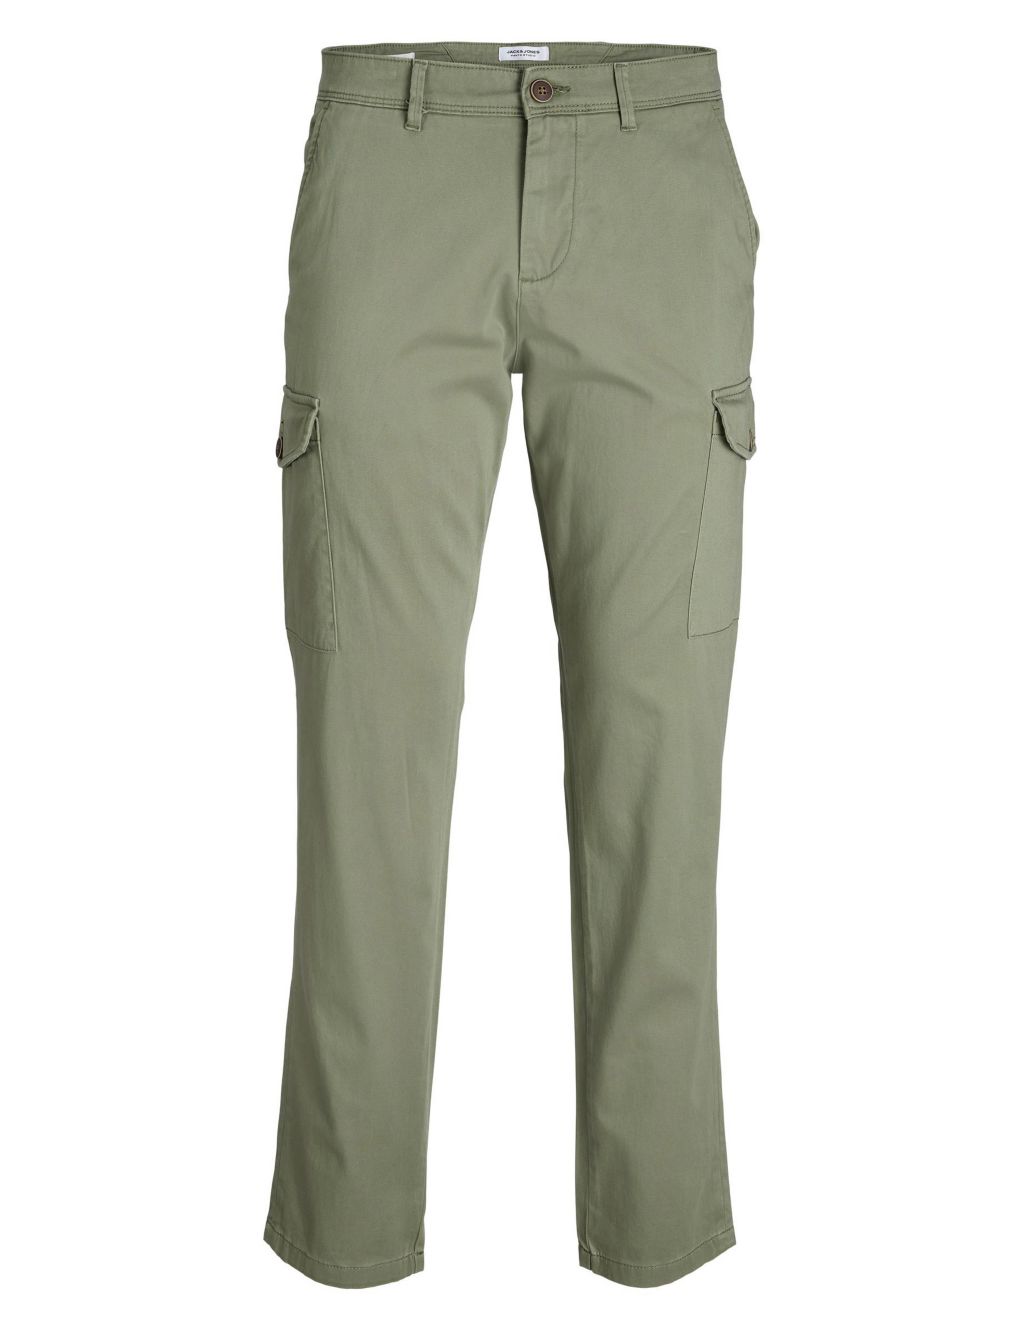 Regular Fit Cargo Trousers image 2